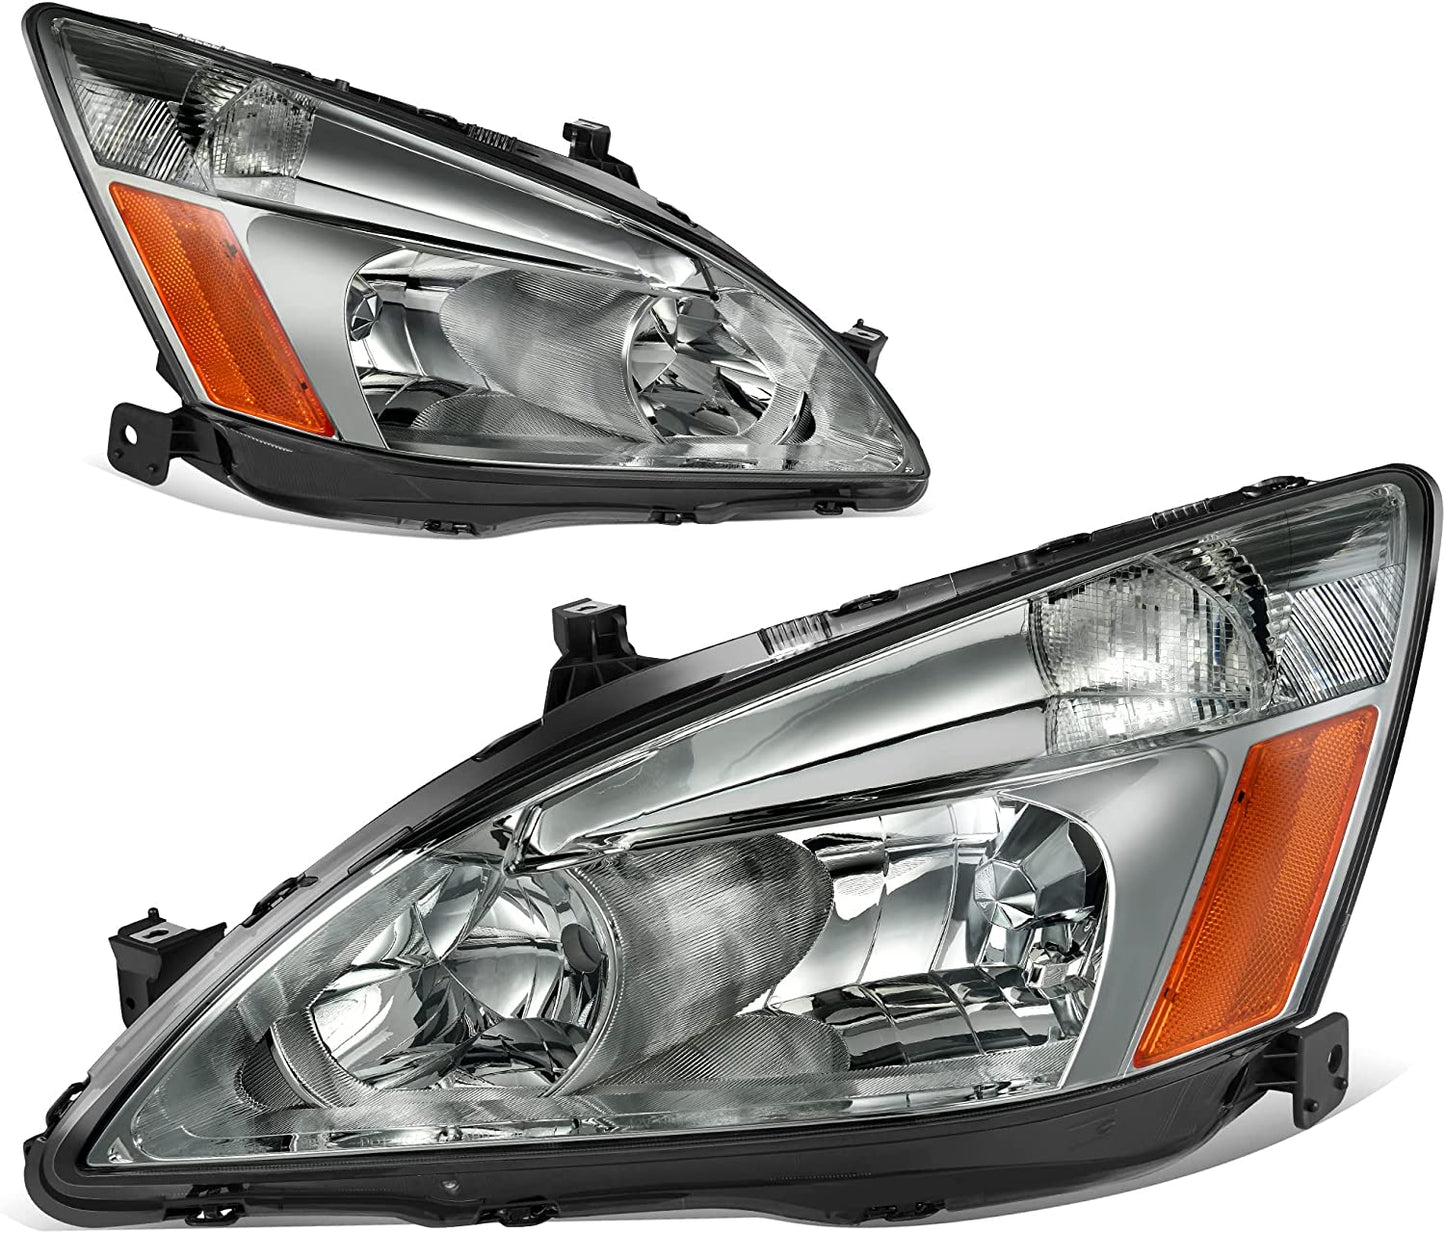 AUTOSAVER88 Headlight Assembly Compatible with 03 04 05 06 07 Accord OE Replacement Chrome Headlights w/Clear Housing